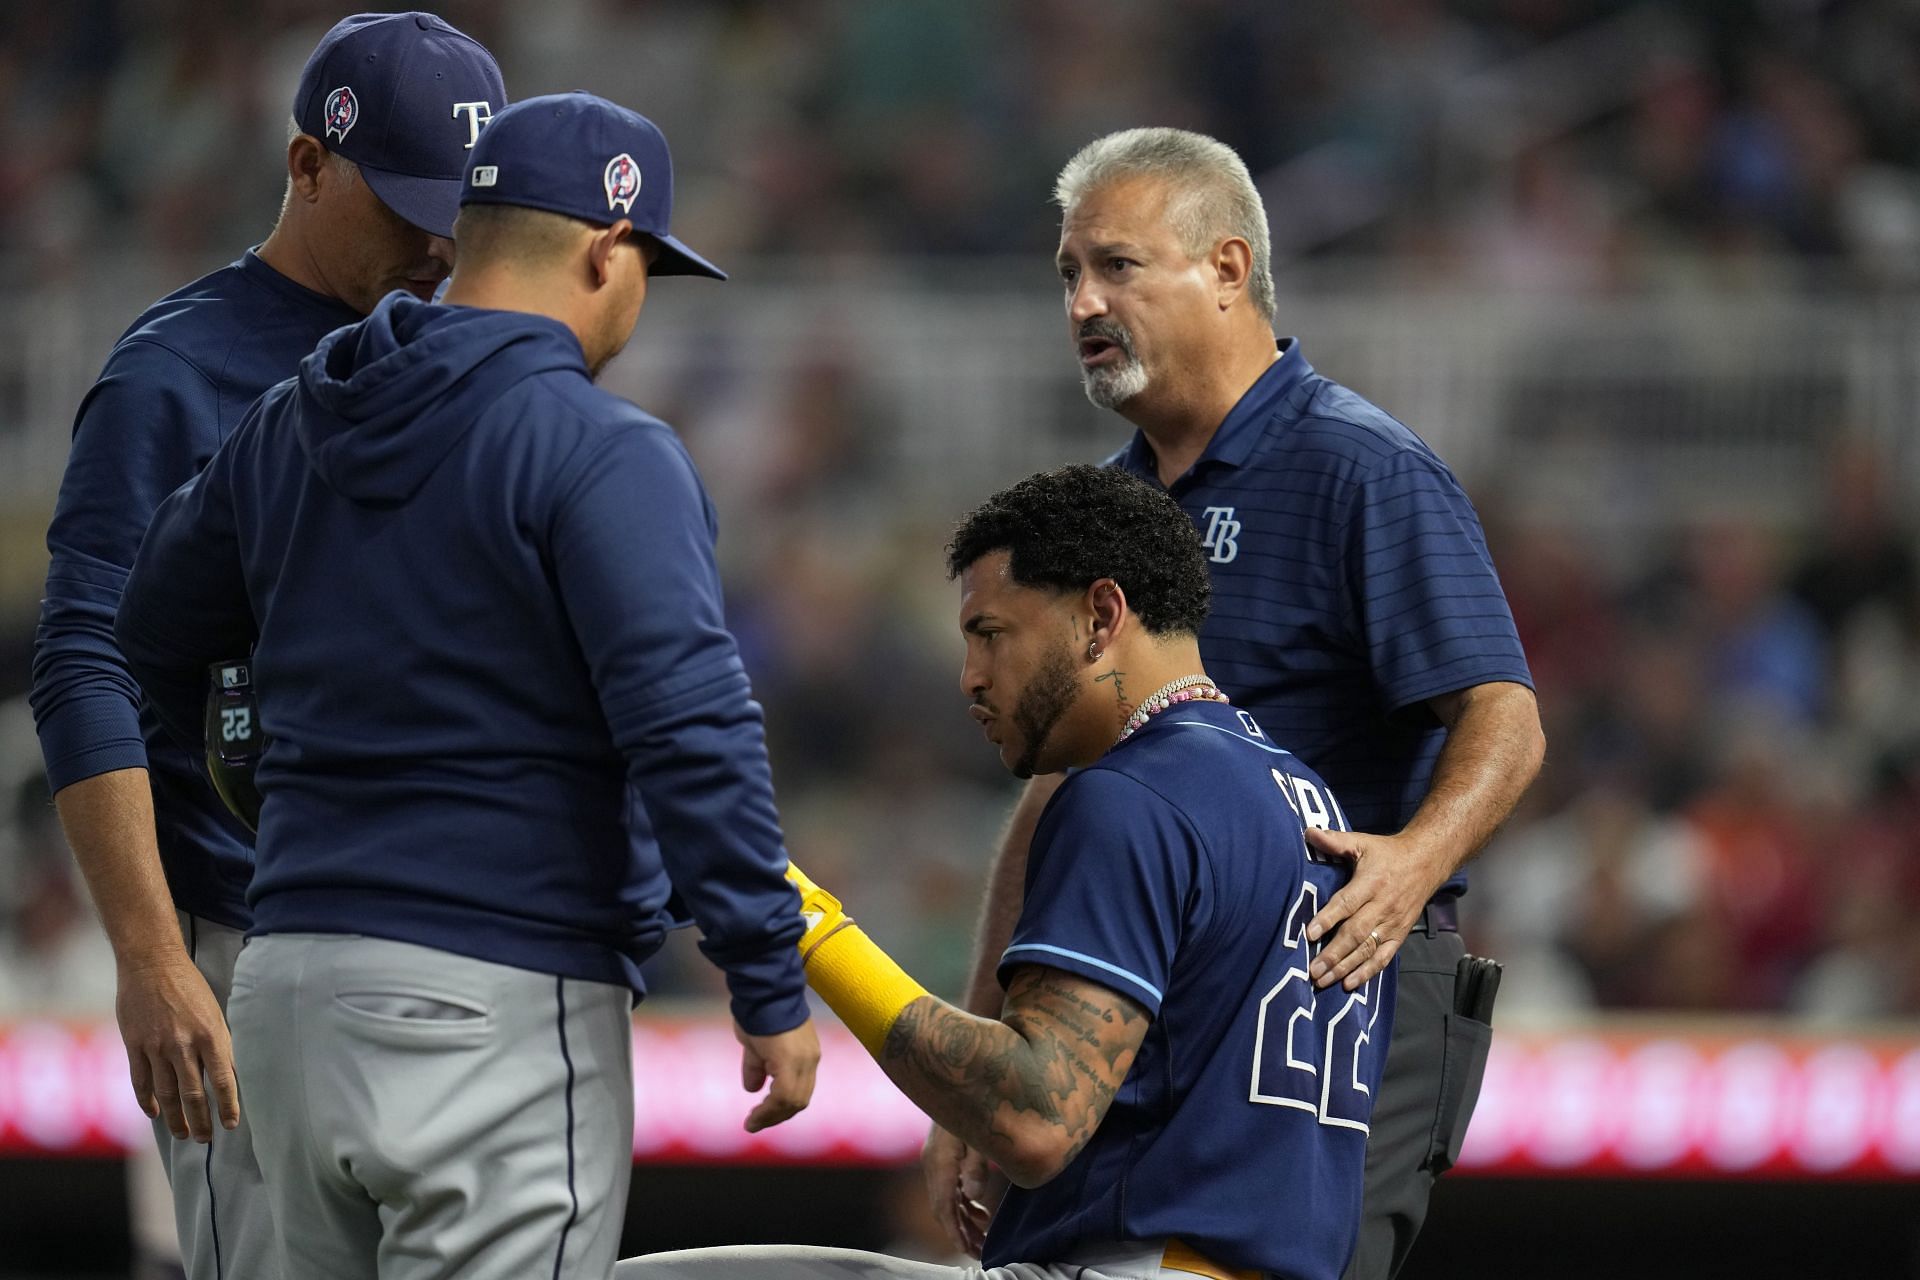 Jose Siri was attended by team staff after being hit by a pitch in the fifth inning.